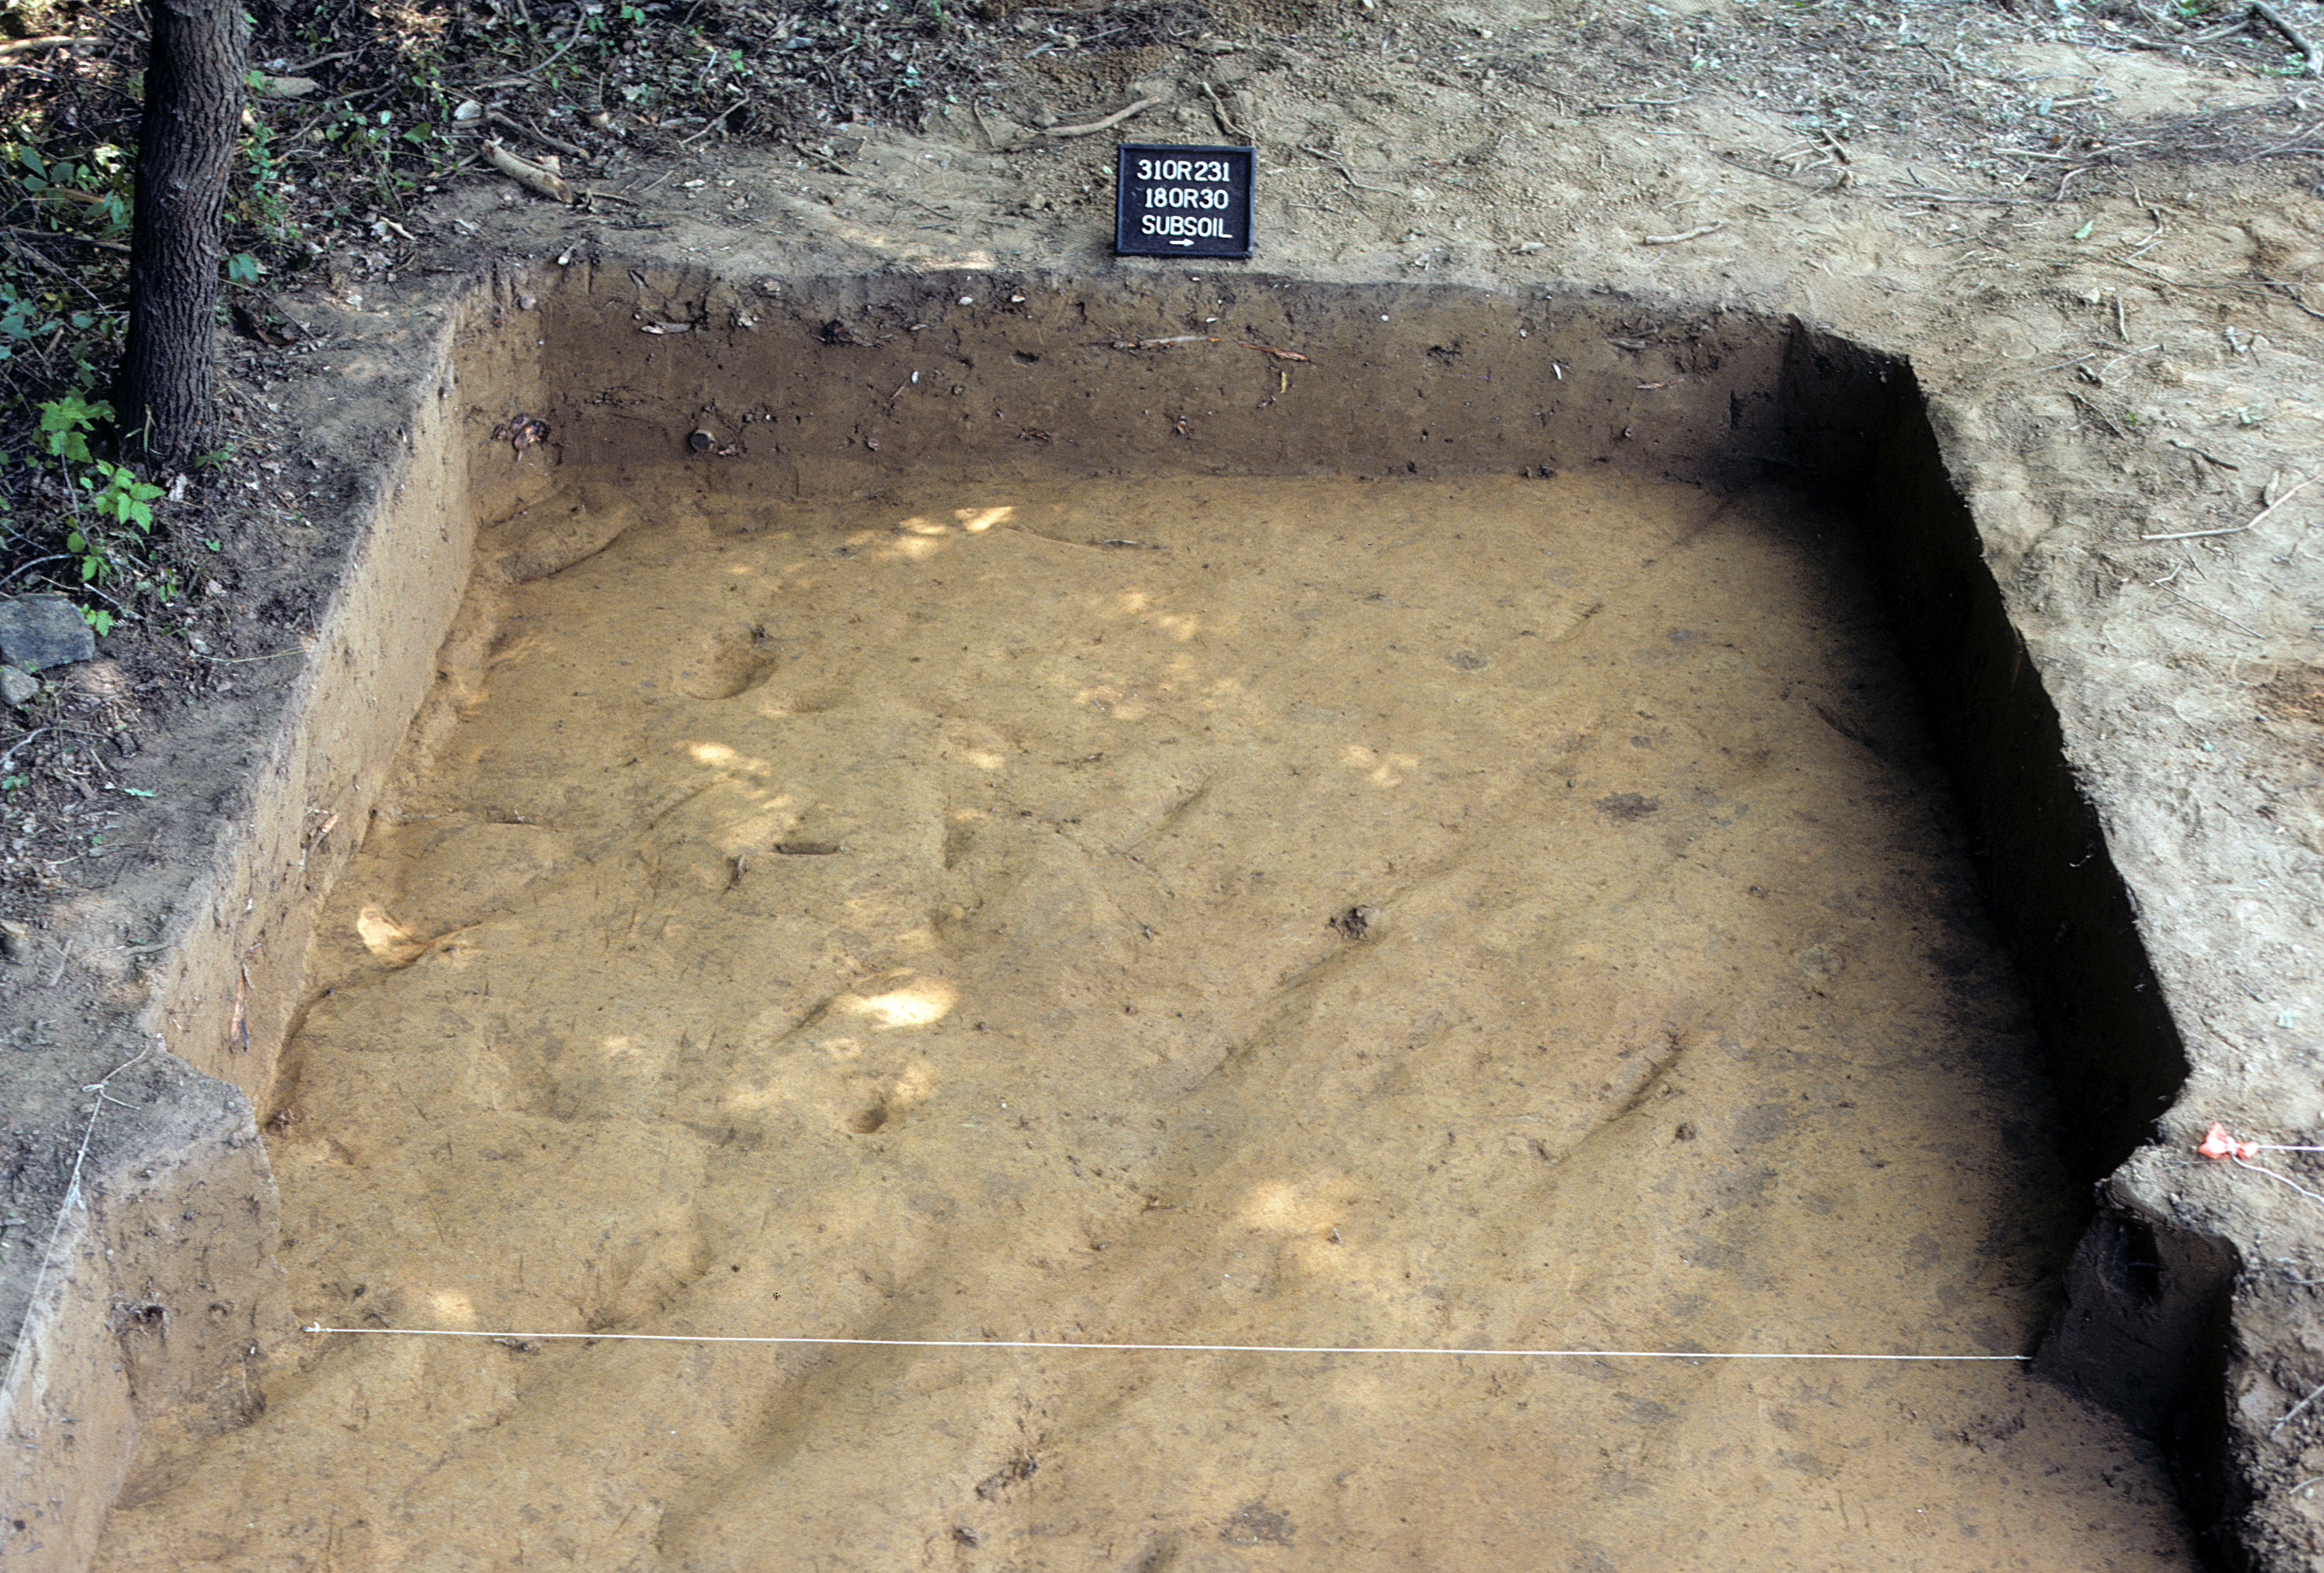 Figure 717. Sq. 180R30 at top of subsoil (view to west).